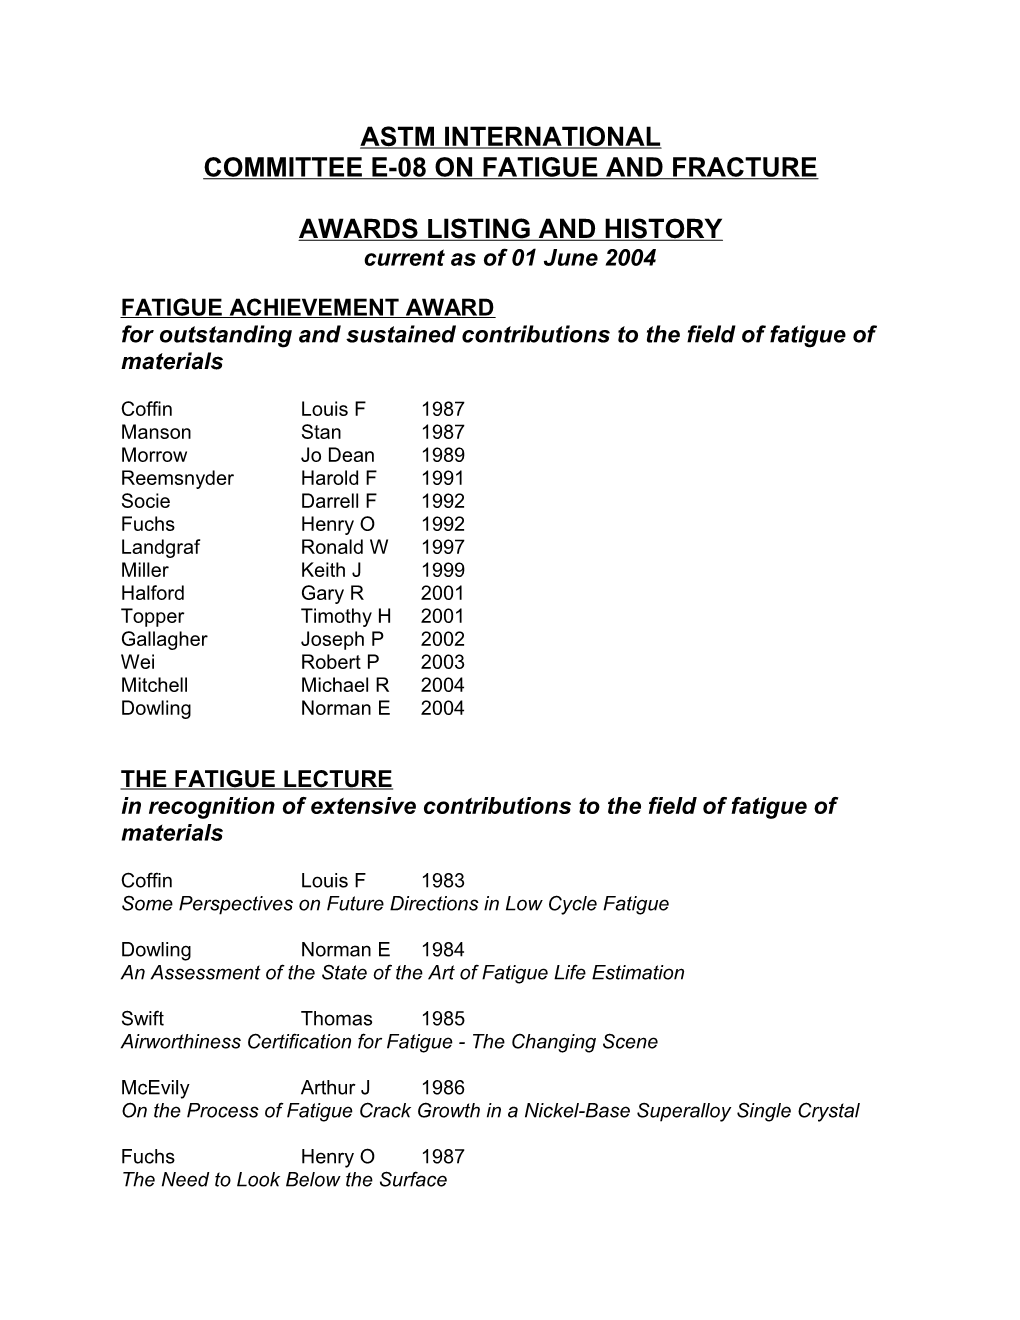 Committee E-08 on Fatigue and Fracture